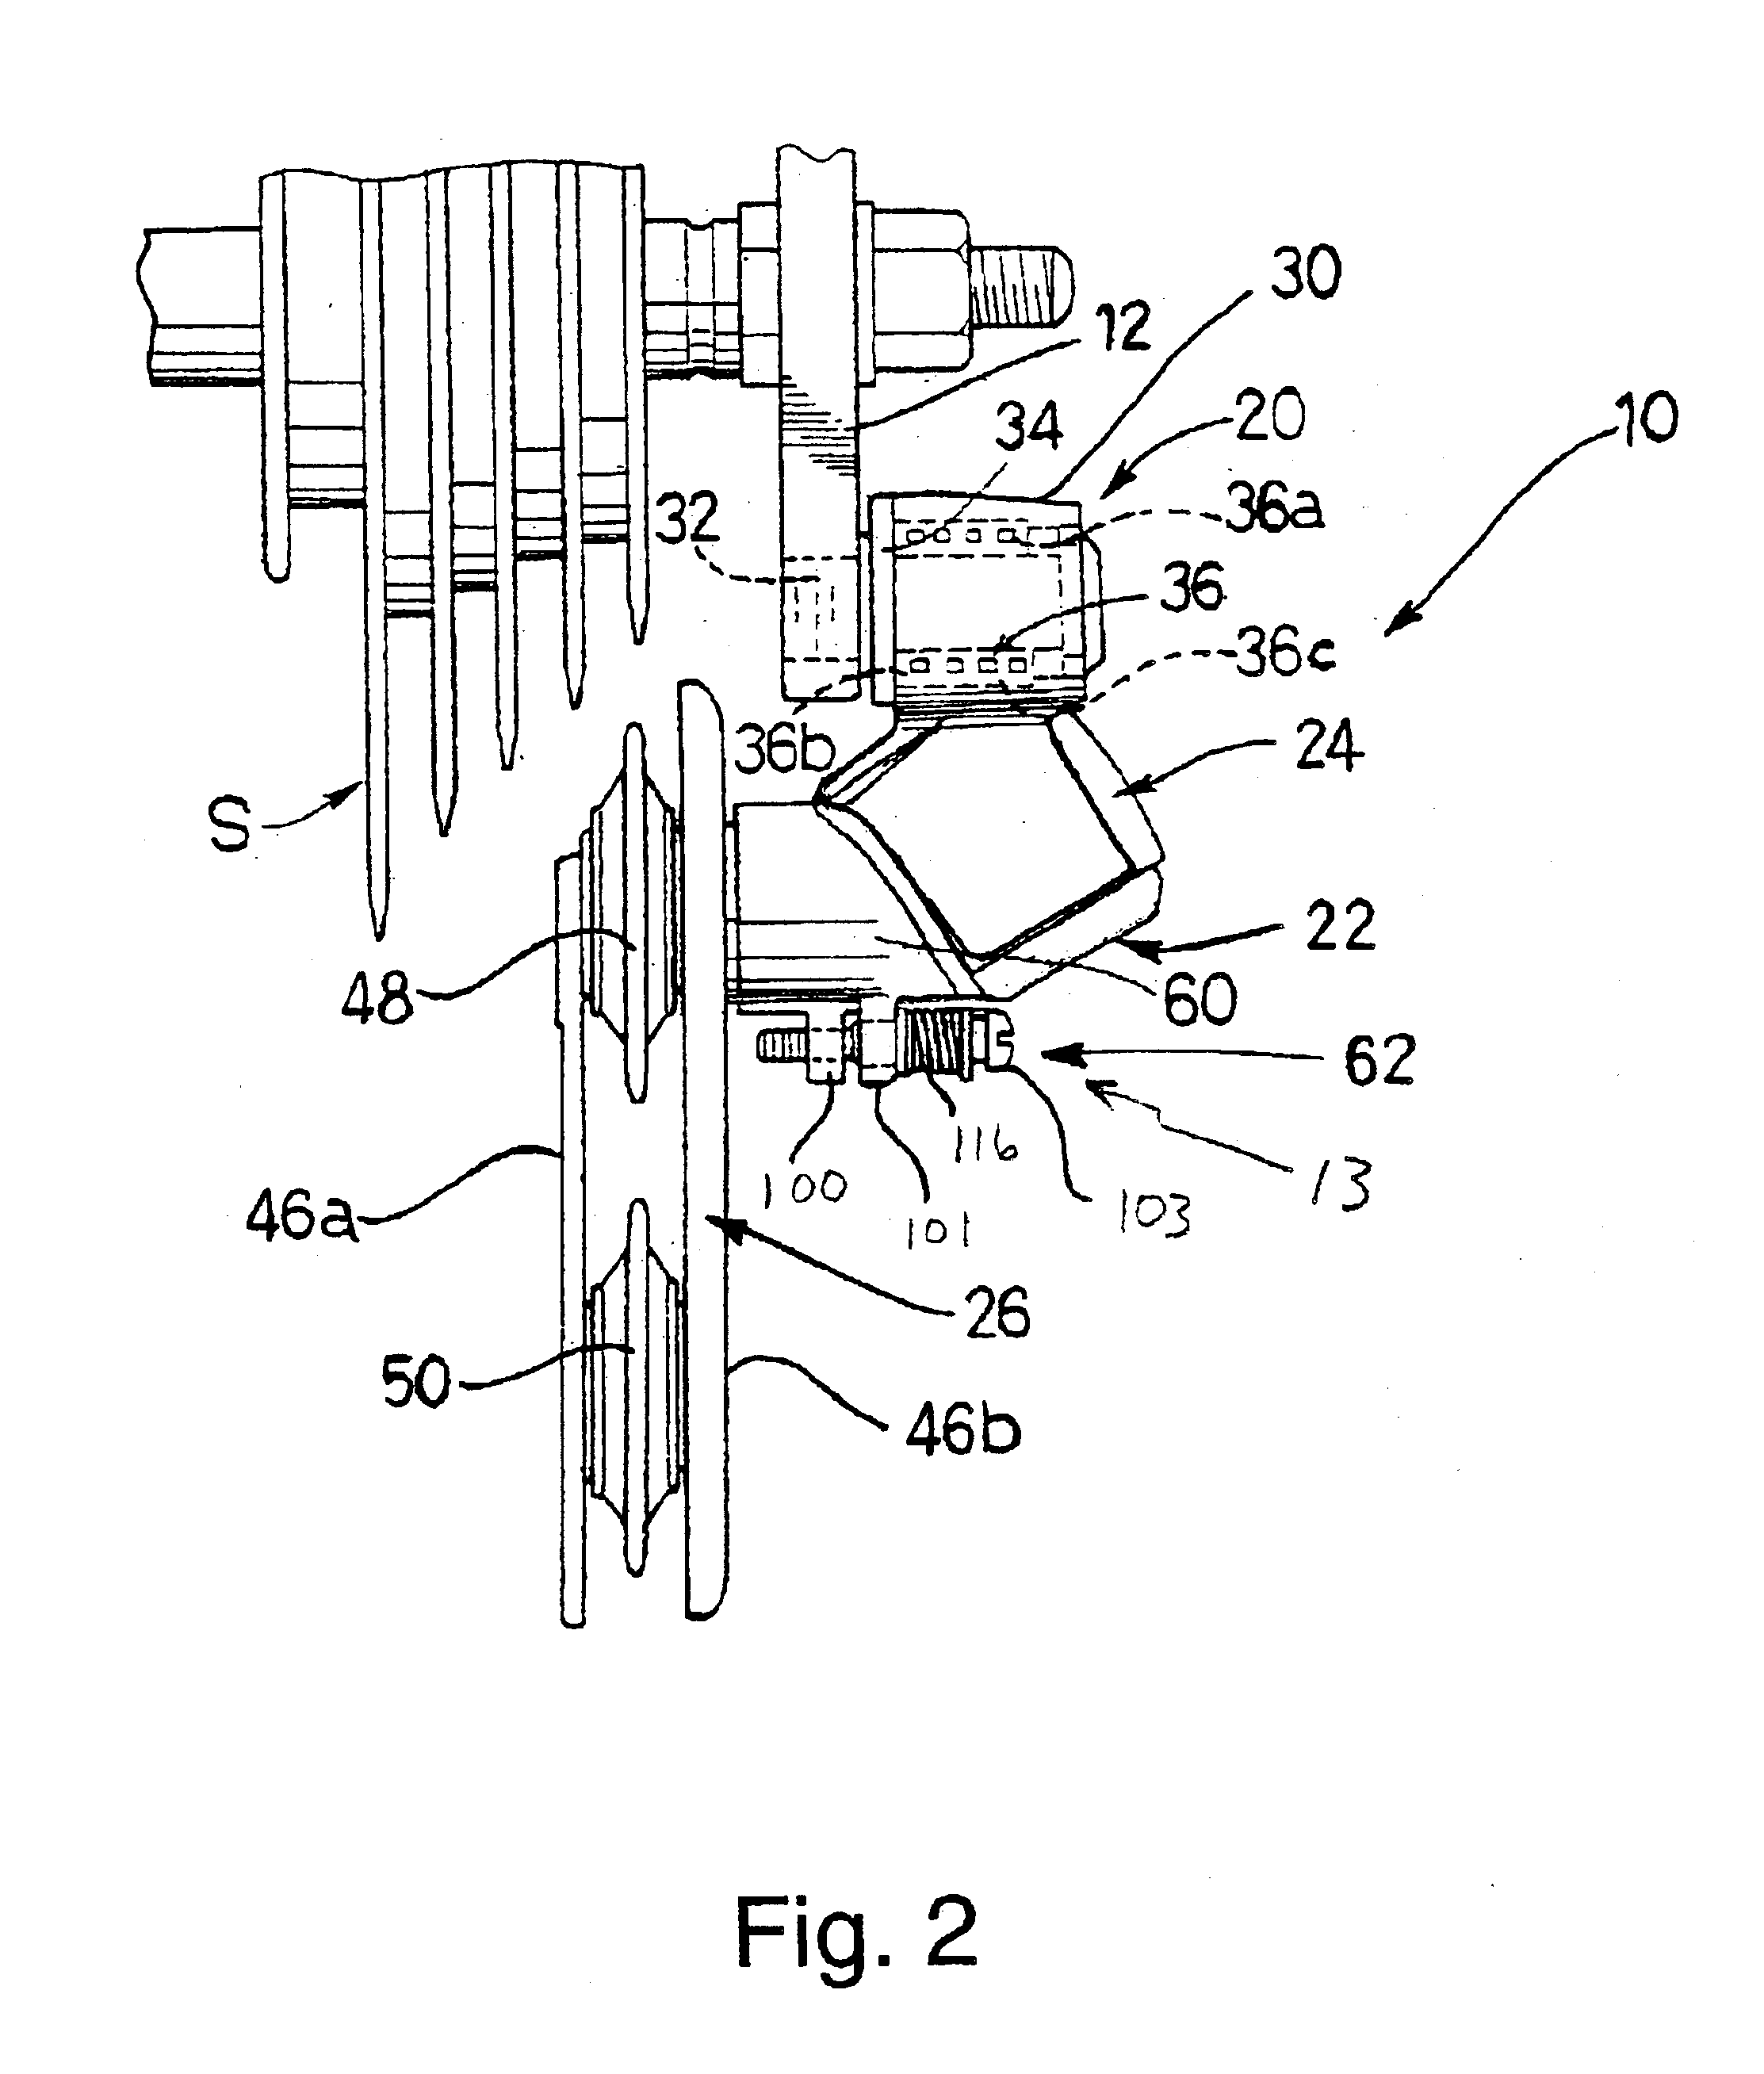 Cage plate adjusting mechanism for a bicycle rear derailleur